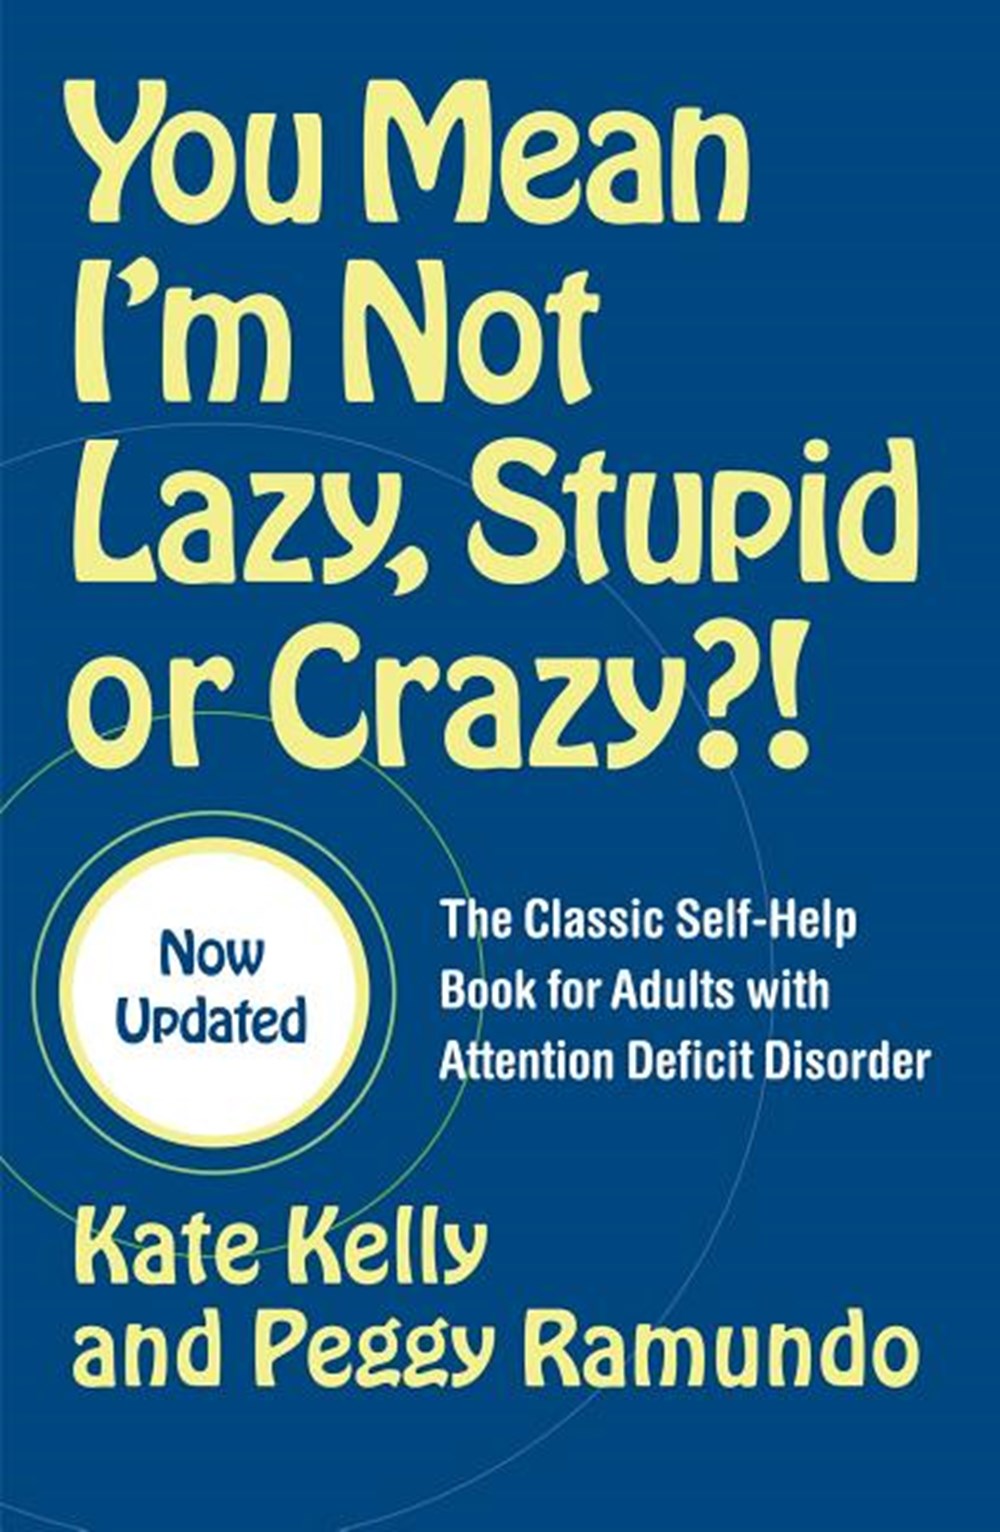 You Mean I'm Not Lazy, Stupid or Crazy?!: The Classic Self-Help Book for Adults with Attention Defic